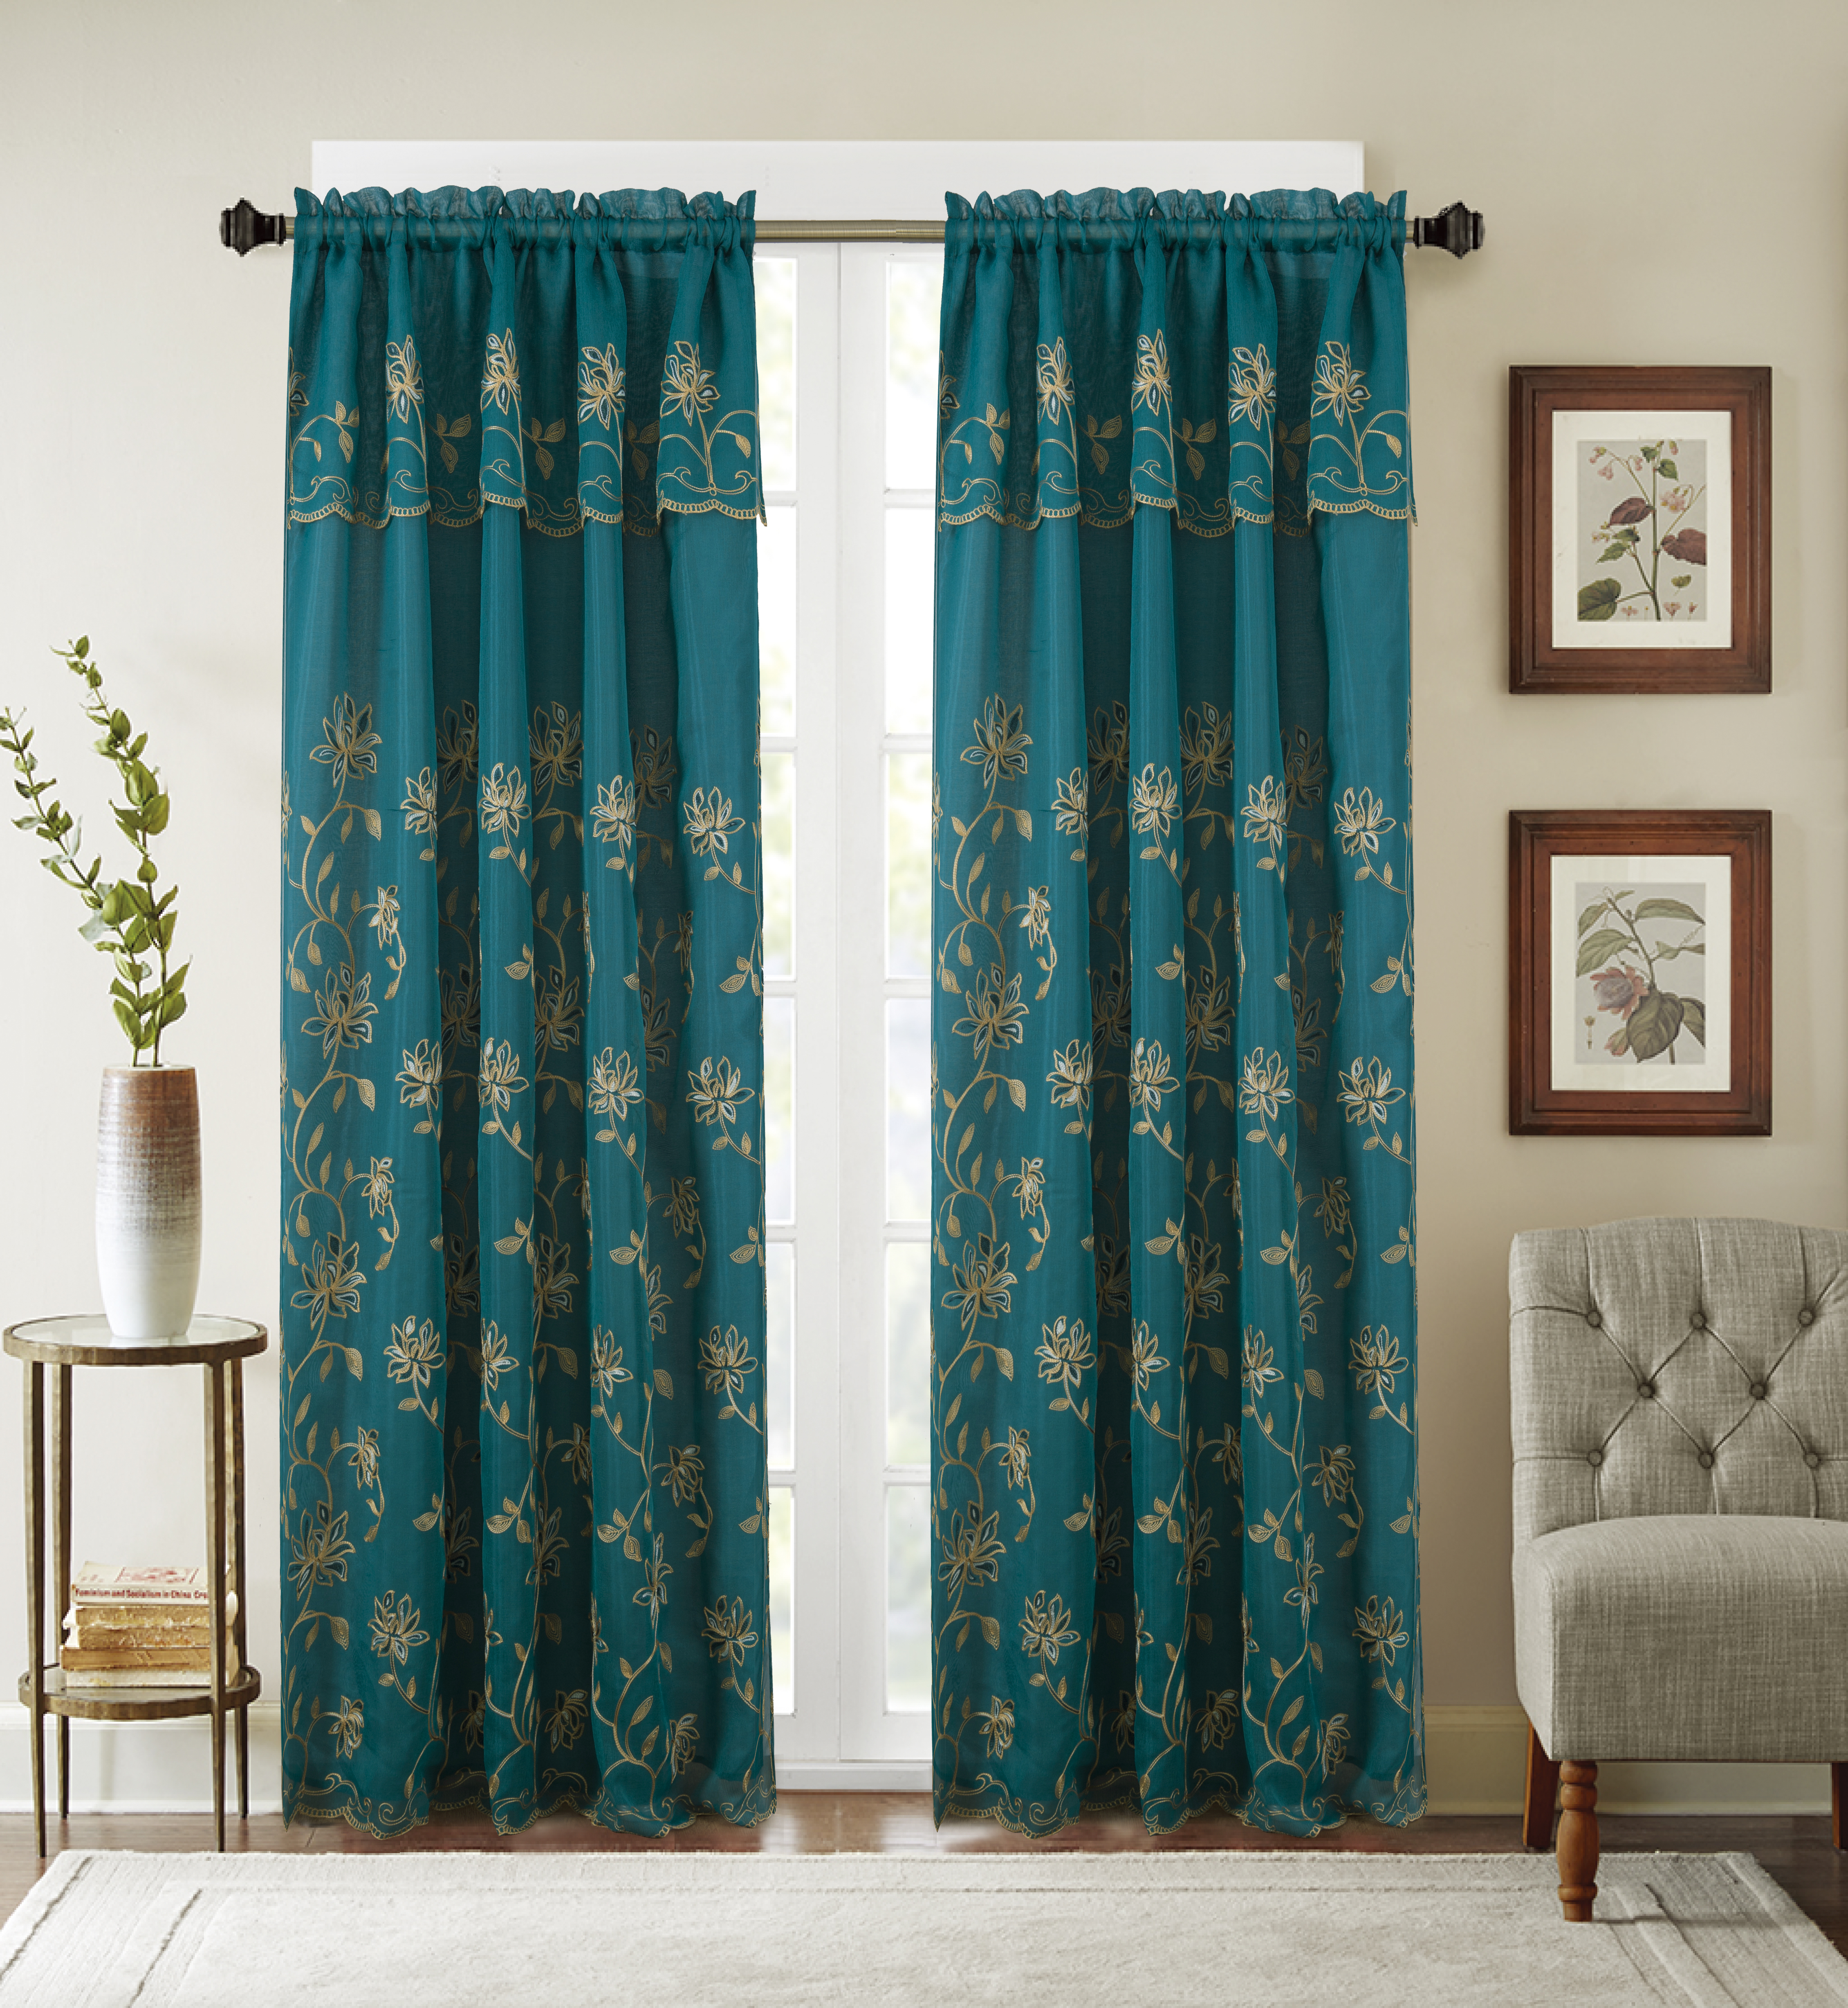 Shower Curtain With Attached Valance, Fabric Shower Curtains With Attached Valances